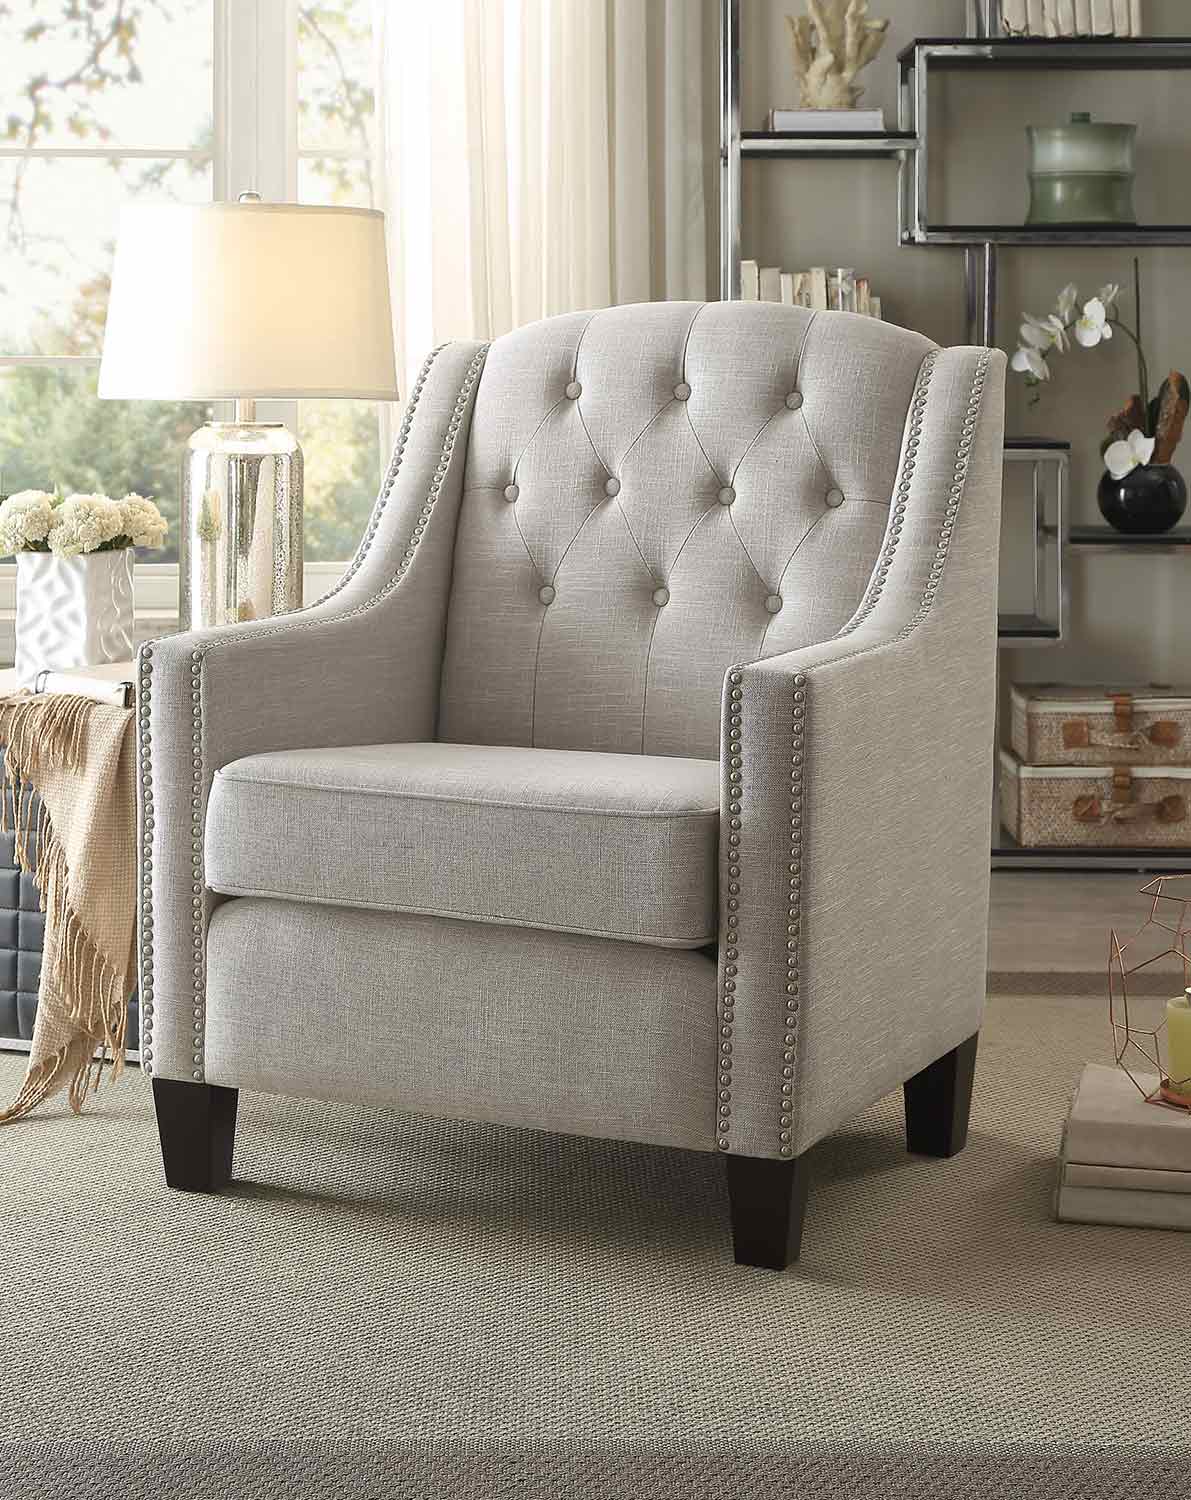 Homelegance Harmony Accent Chair - Neutral Beige